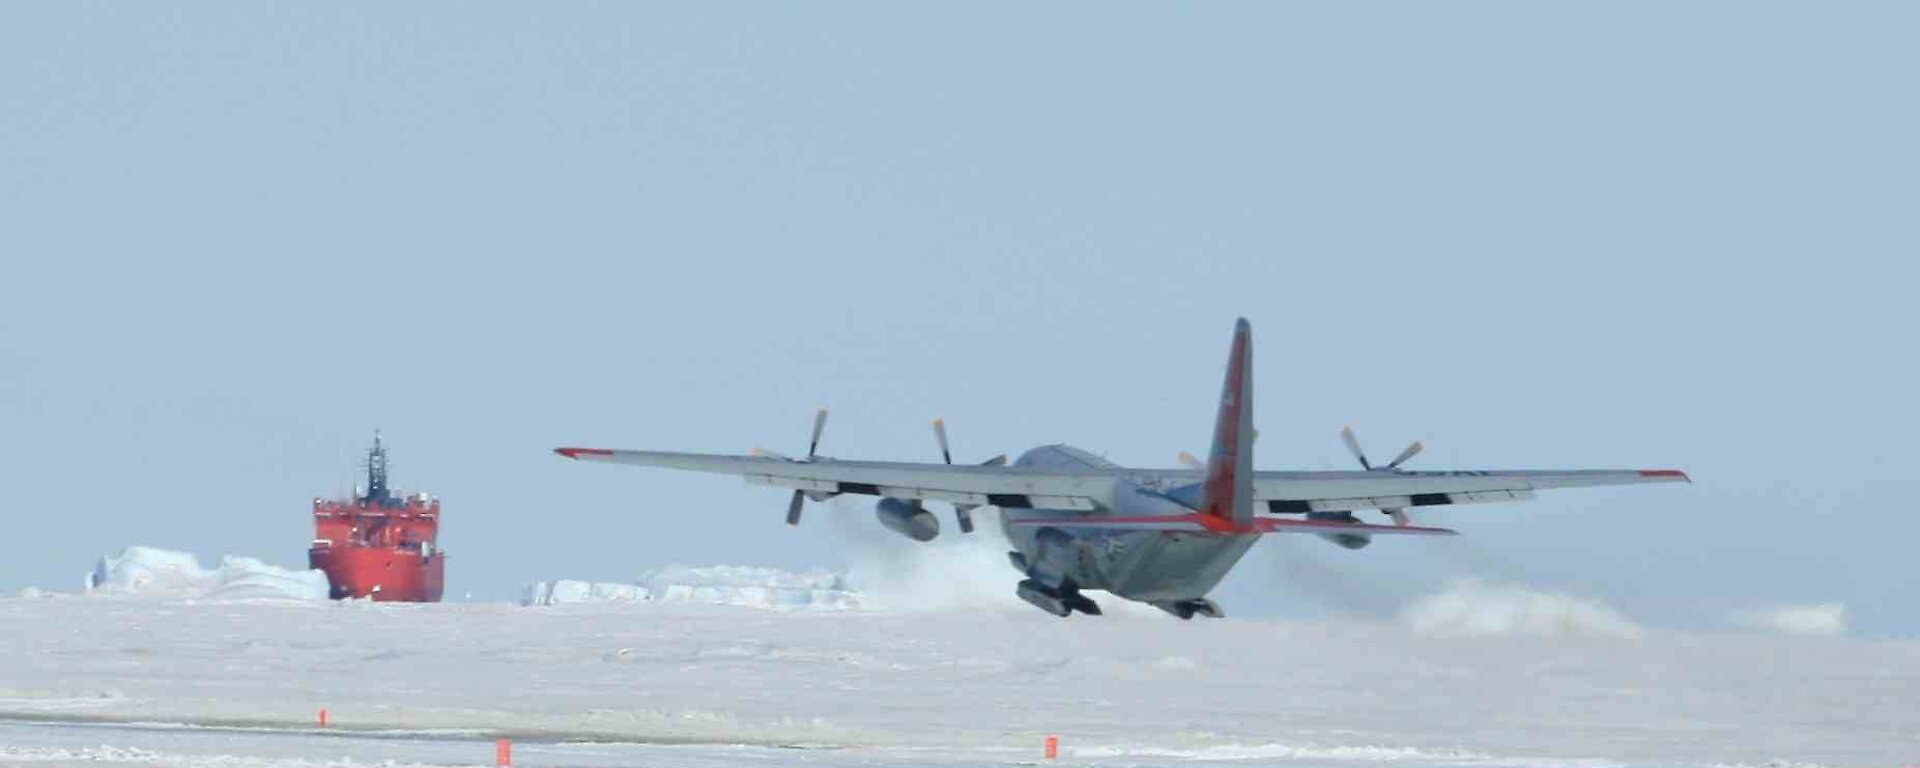 US C-130 Hercules aircraft lifting off from sea-ice runway at Davis station with injured expeditioner Dwayne Rooke on board. Aurora Australis in the background.